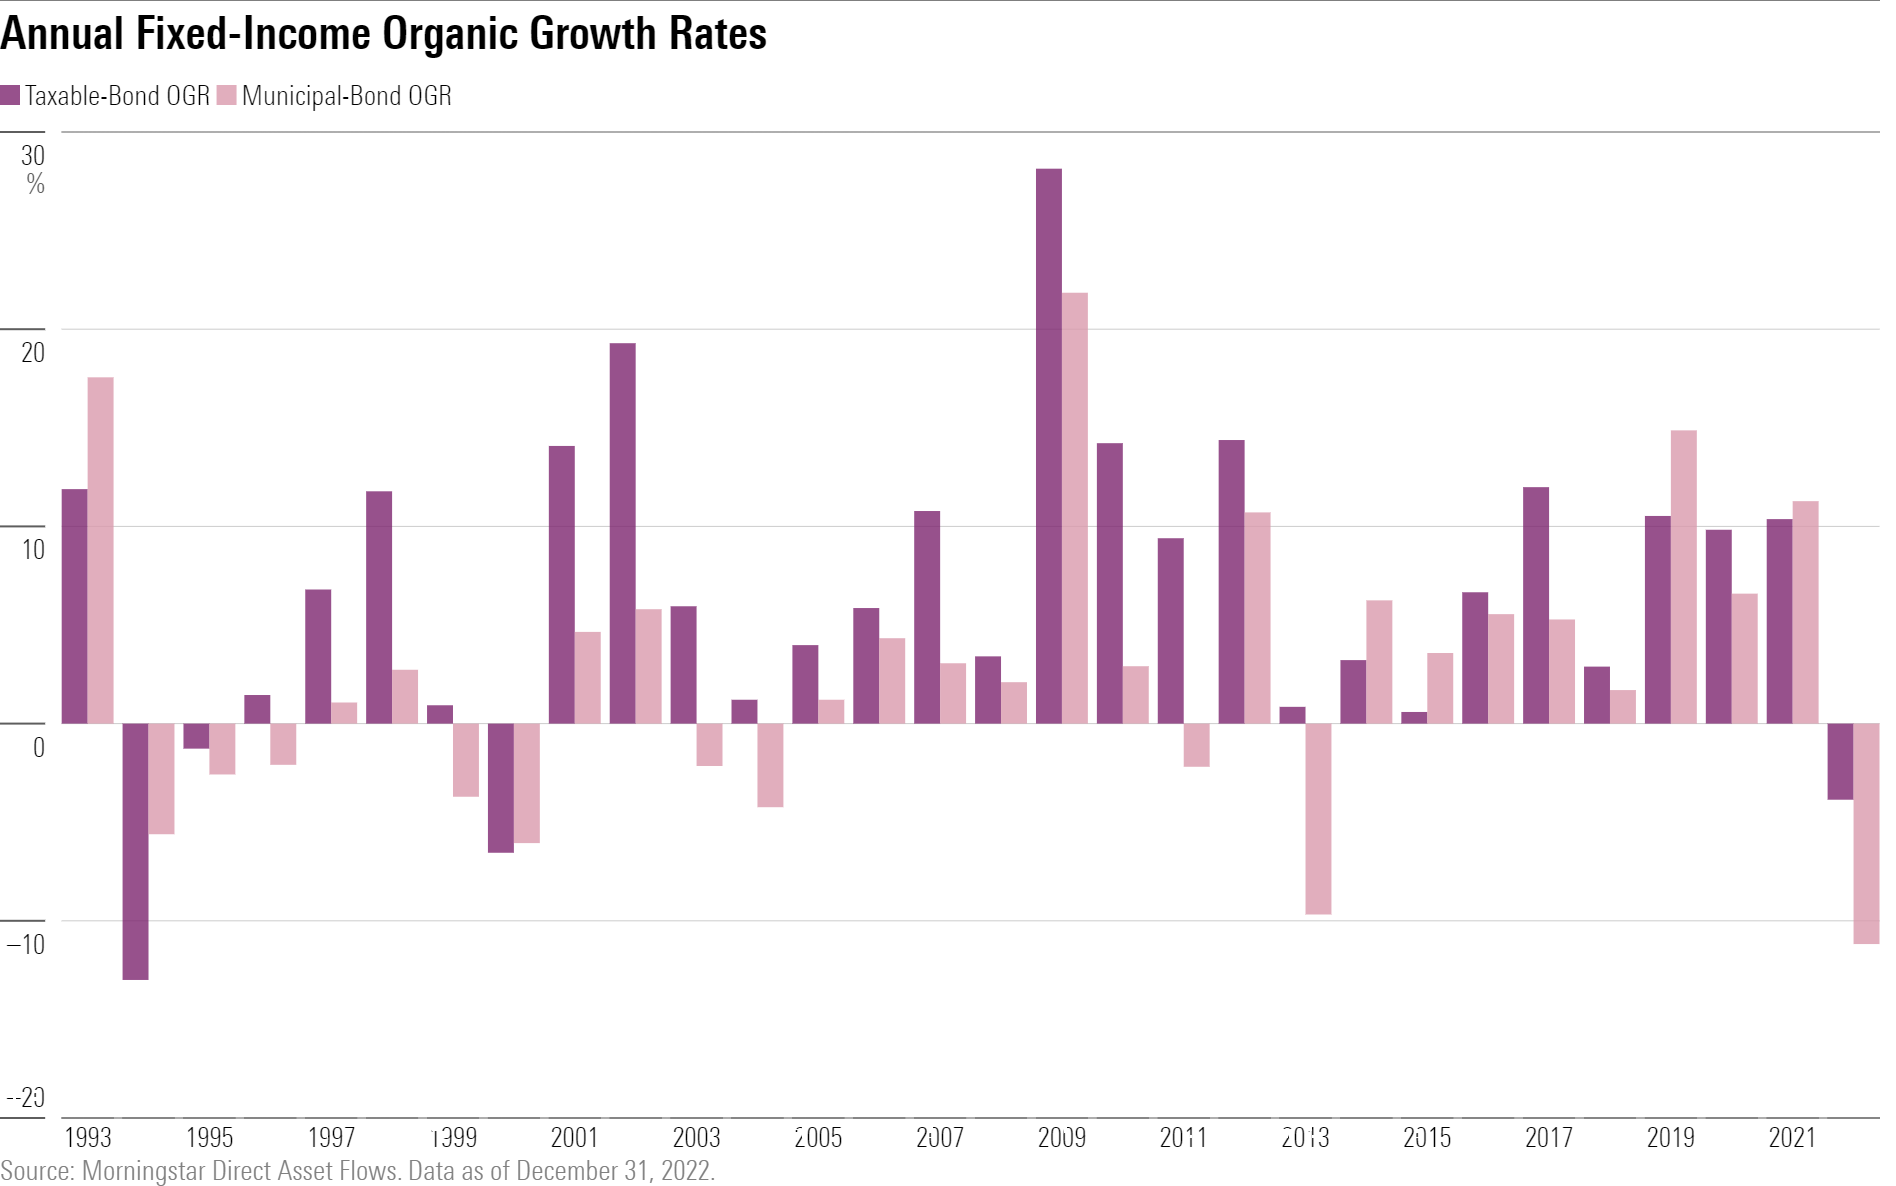 The bar chart shows historical annual Organic Growth Rates in fixed-income strategies, separated by Taxable and Municipal strategies.